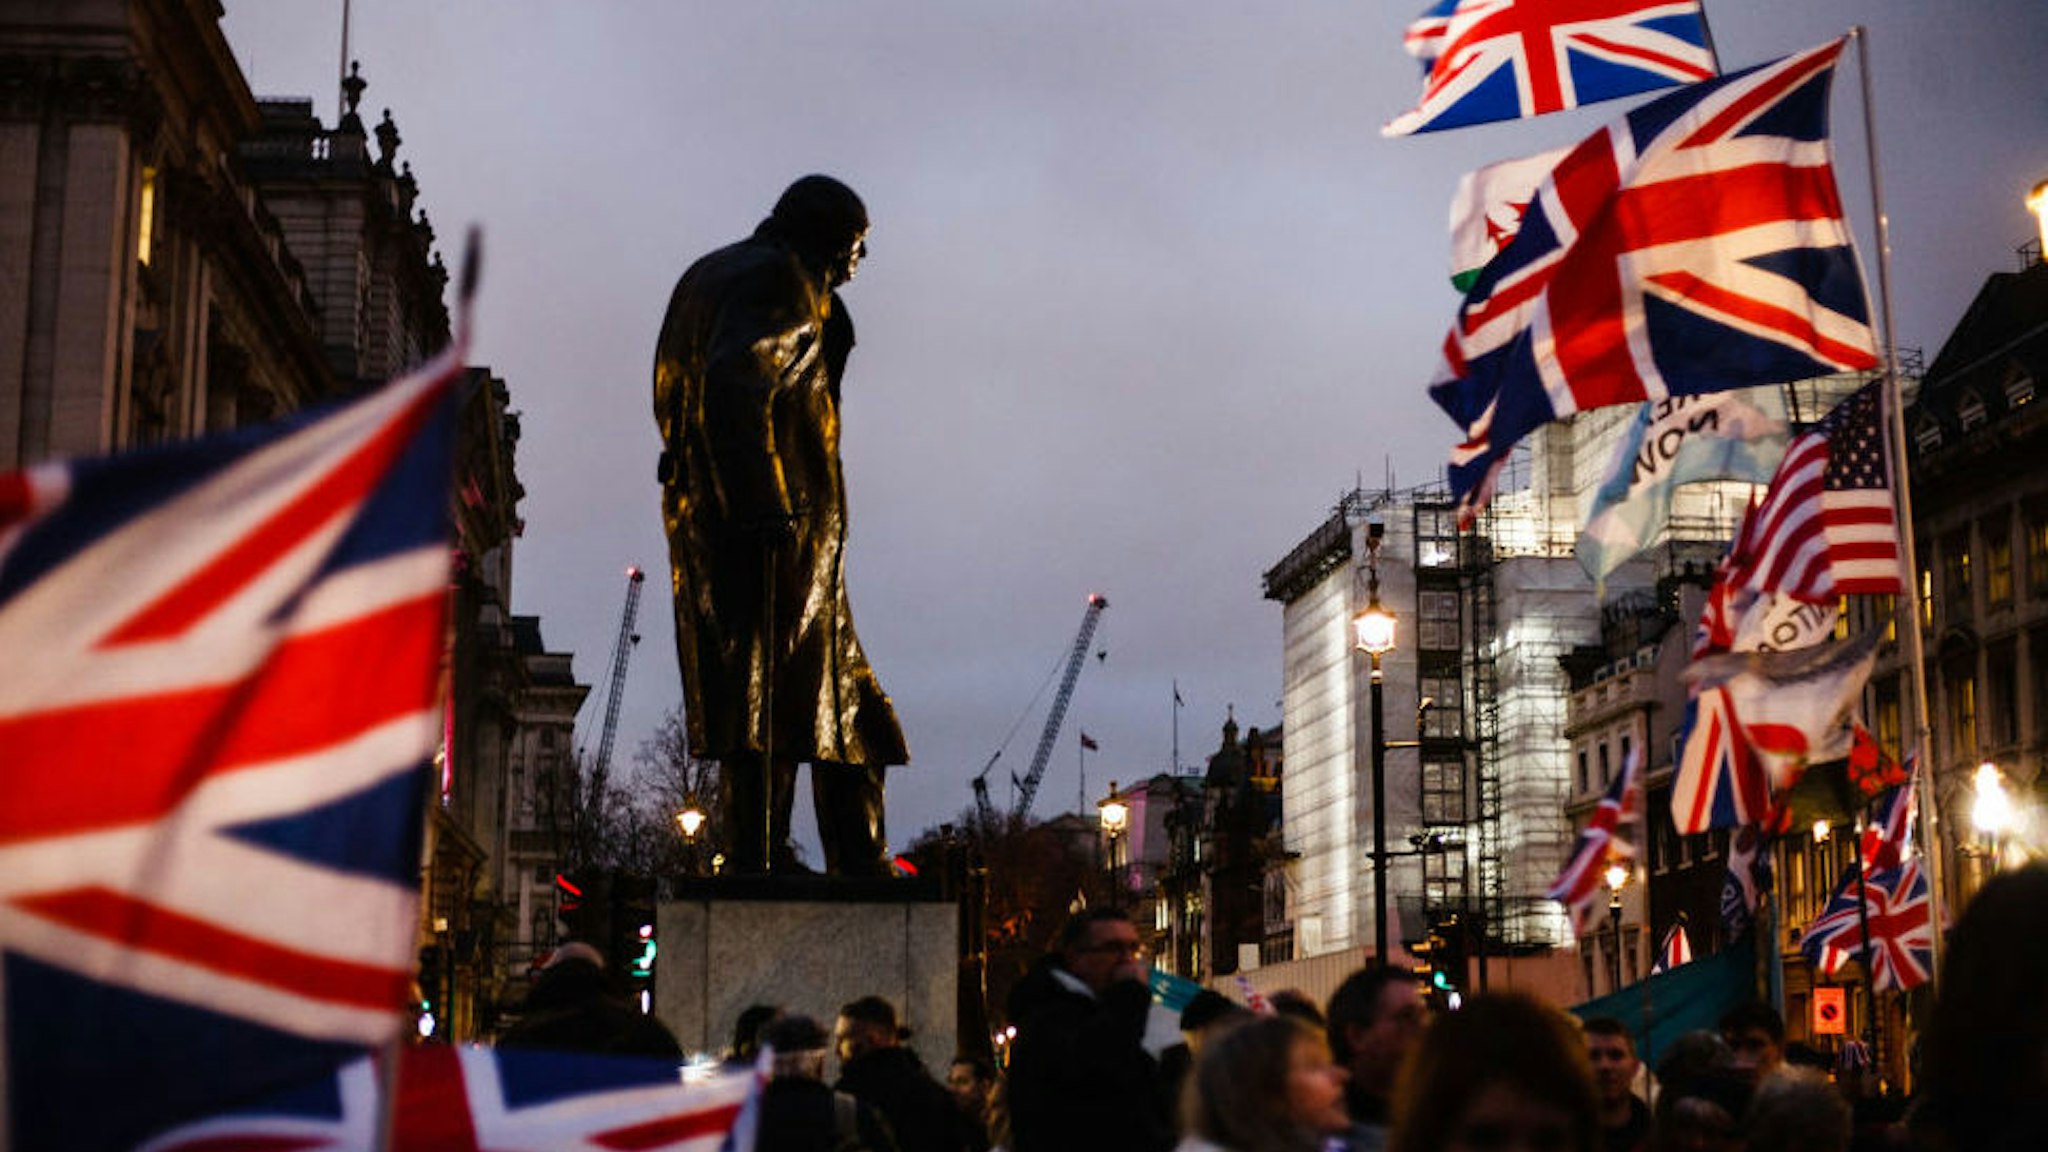 The statue of Britain's wartime leader Winston Churchill stands surrounded by Union Jack flags in London, England, on January 31, 2020. Britain's exit from the European Union, today at 11pm UK time (midnight in Brussels), comes more than three and a half years since the country's deeply polarising EU membership referendum, yet the moment brings to an end only the first stage of the Brexit saga, with the UK's future relationship with the bloc still to be negotiated. British Prime Minister Boris Johnson has insisted that the 11-month transition period, wherein arrangements continue practically unchanged, will not be extended past its December 31 expiration date and that a trade deal can be reached in that time. Critics argue that any such deal will have to be severely constrained in ambition to be negotiated in such a short period, and that workers' rights and other protections may be lost in the process. (Photo by David Cliff/NurPhoto via Getty Images)